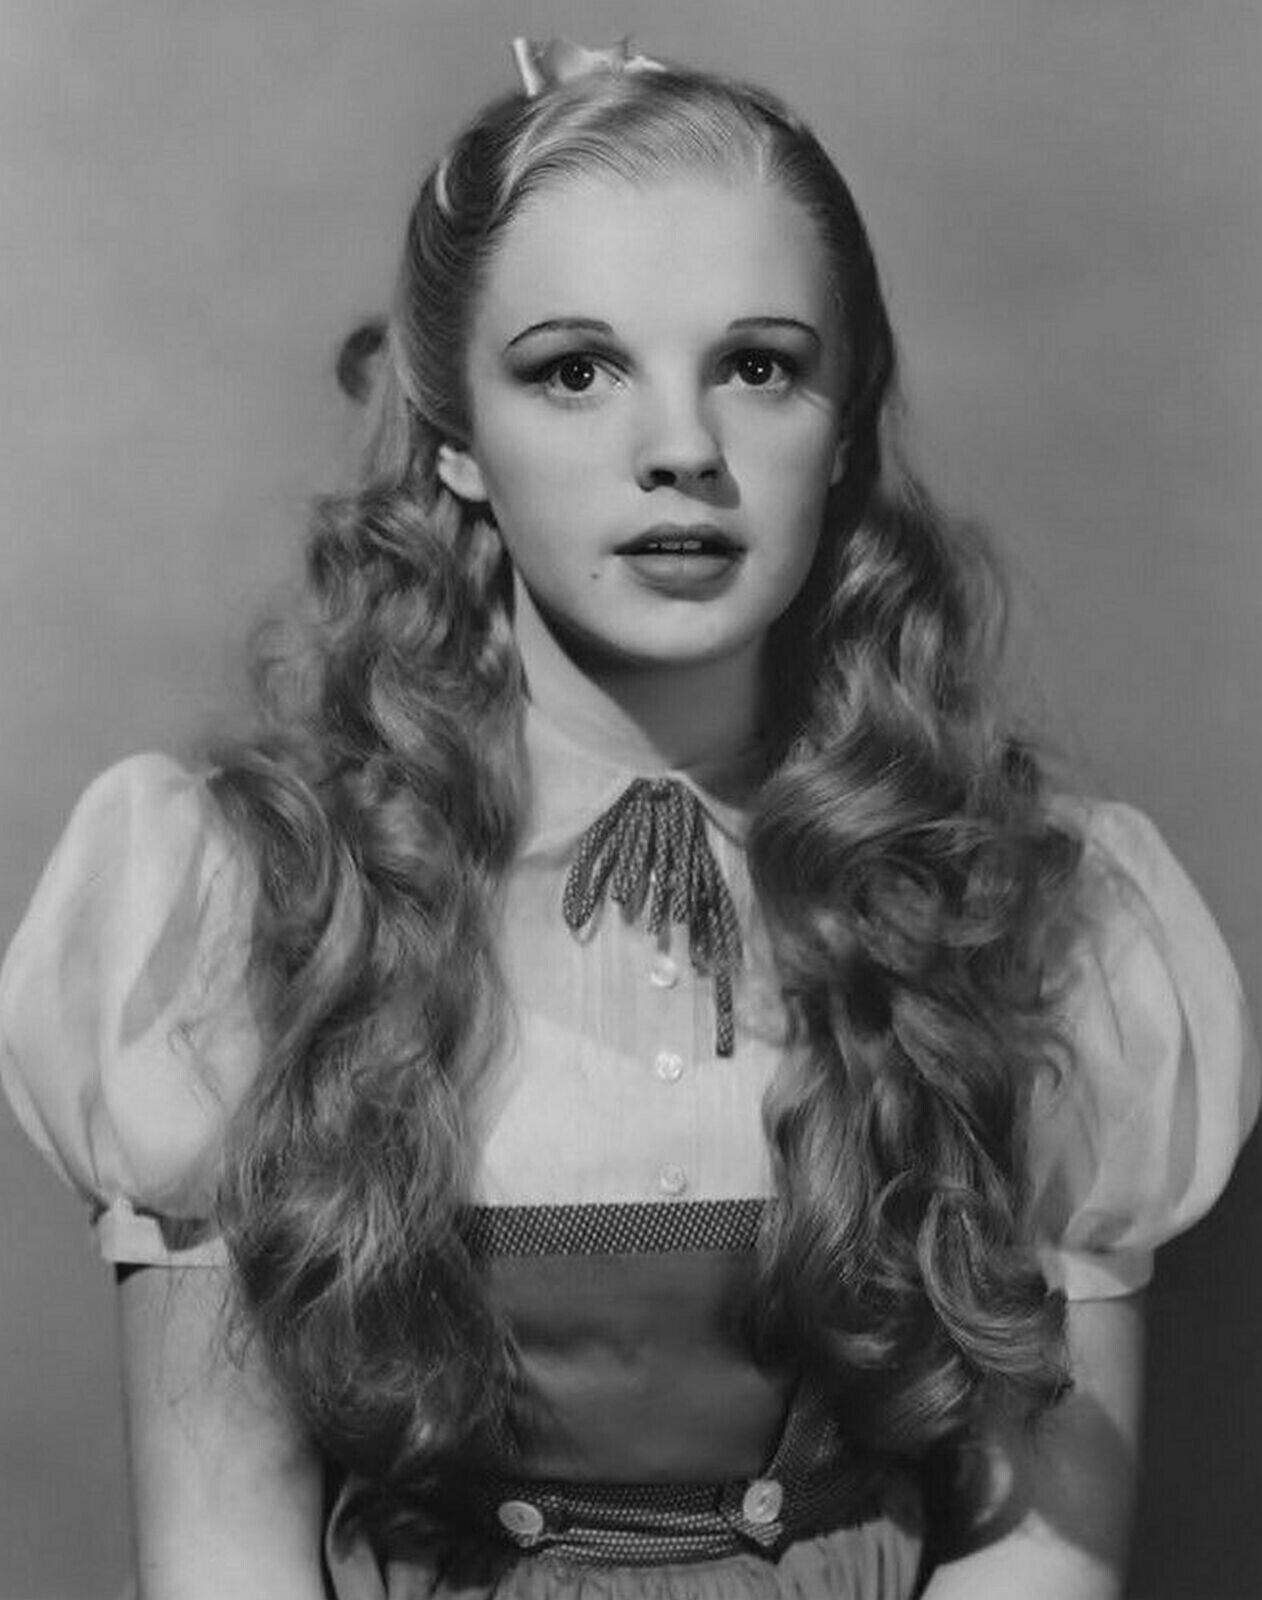 JUDY GARLAND as Dorothy Classic Movie Wizard of Oz Picture Photo 8x10